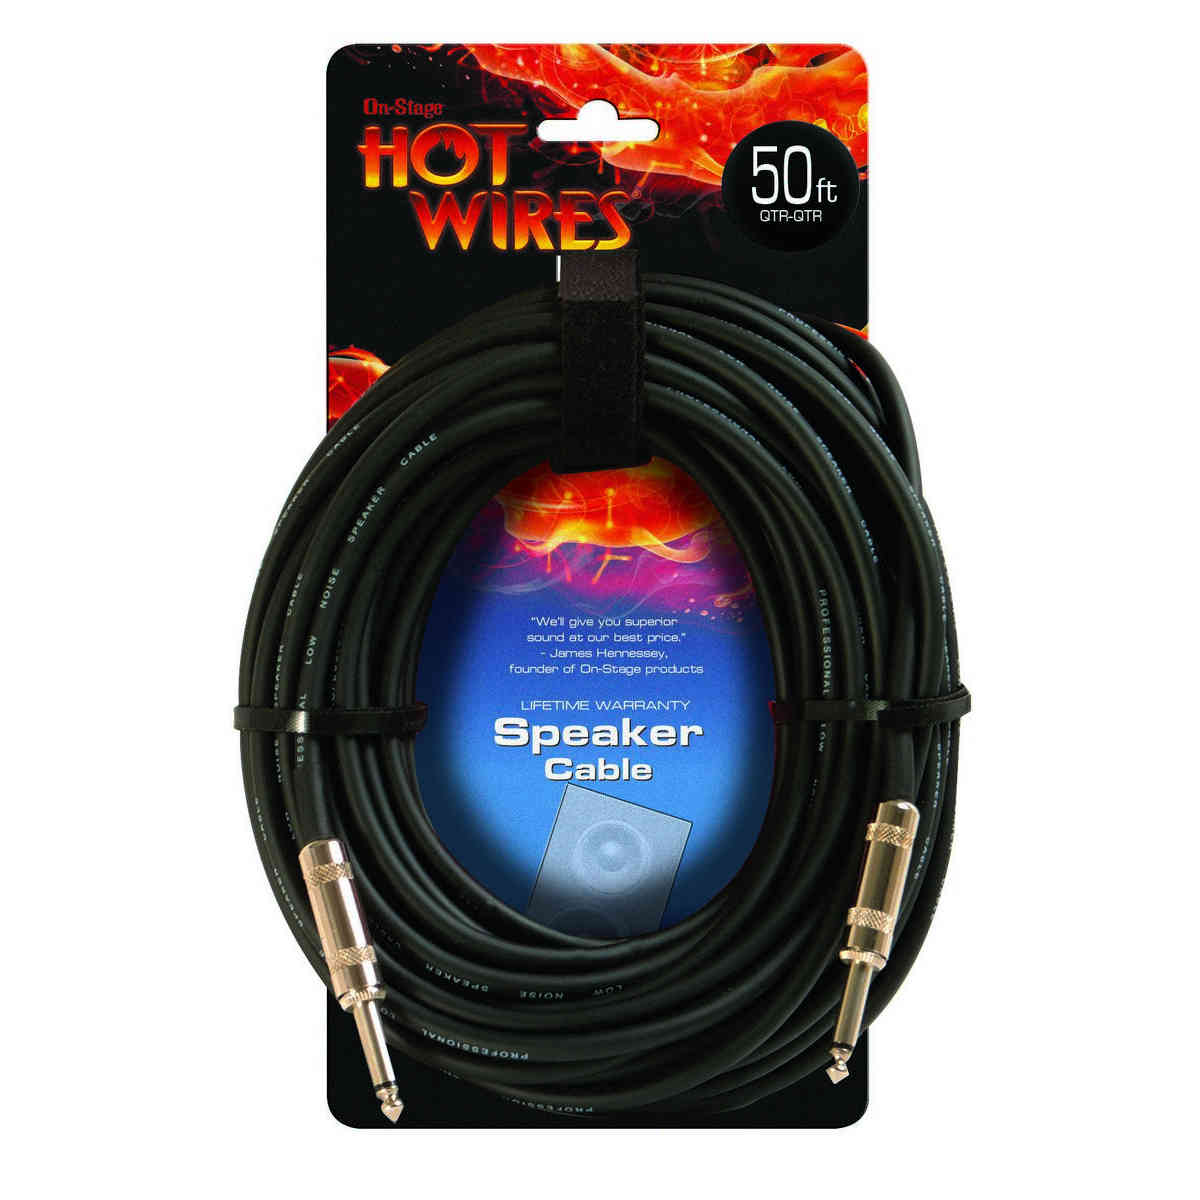 On-Stage SP14-50 Speaker Cable (50', QTR-QTR)